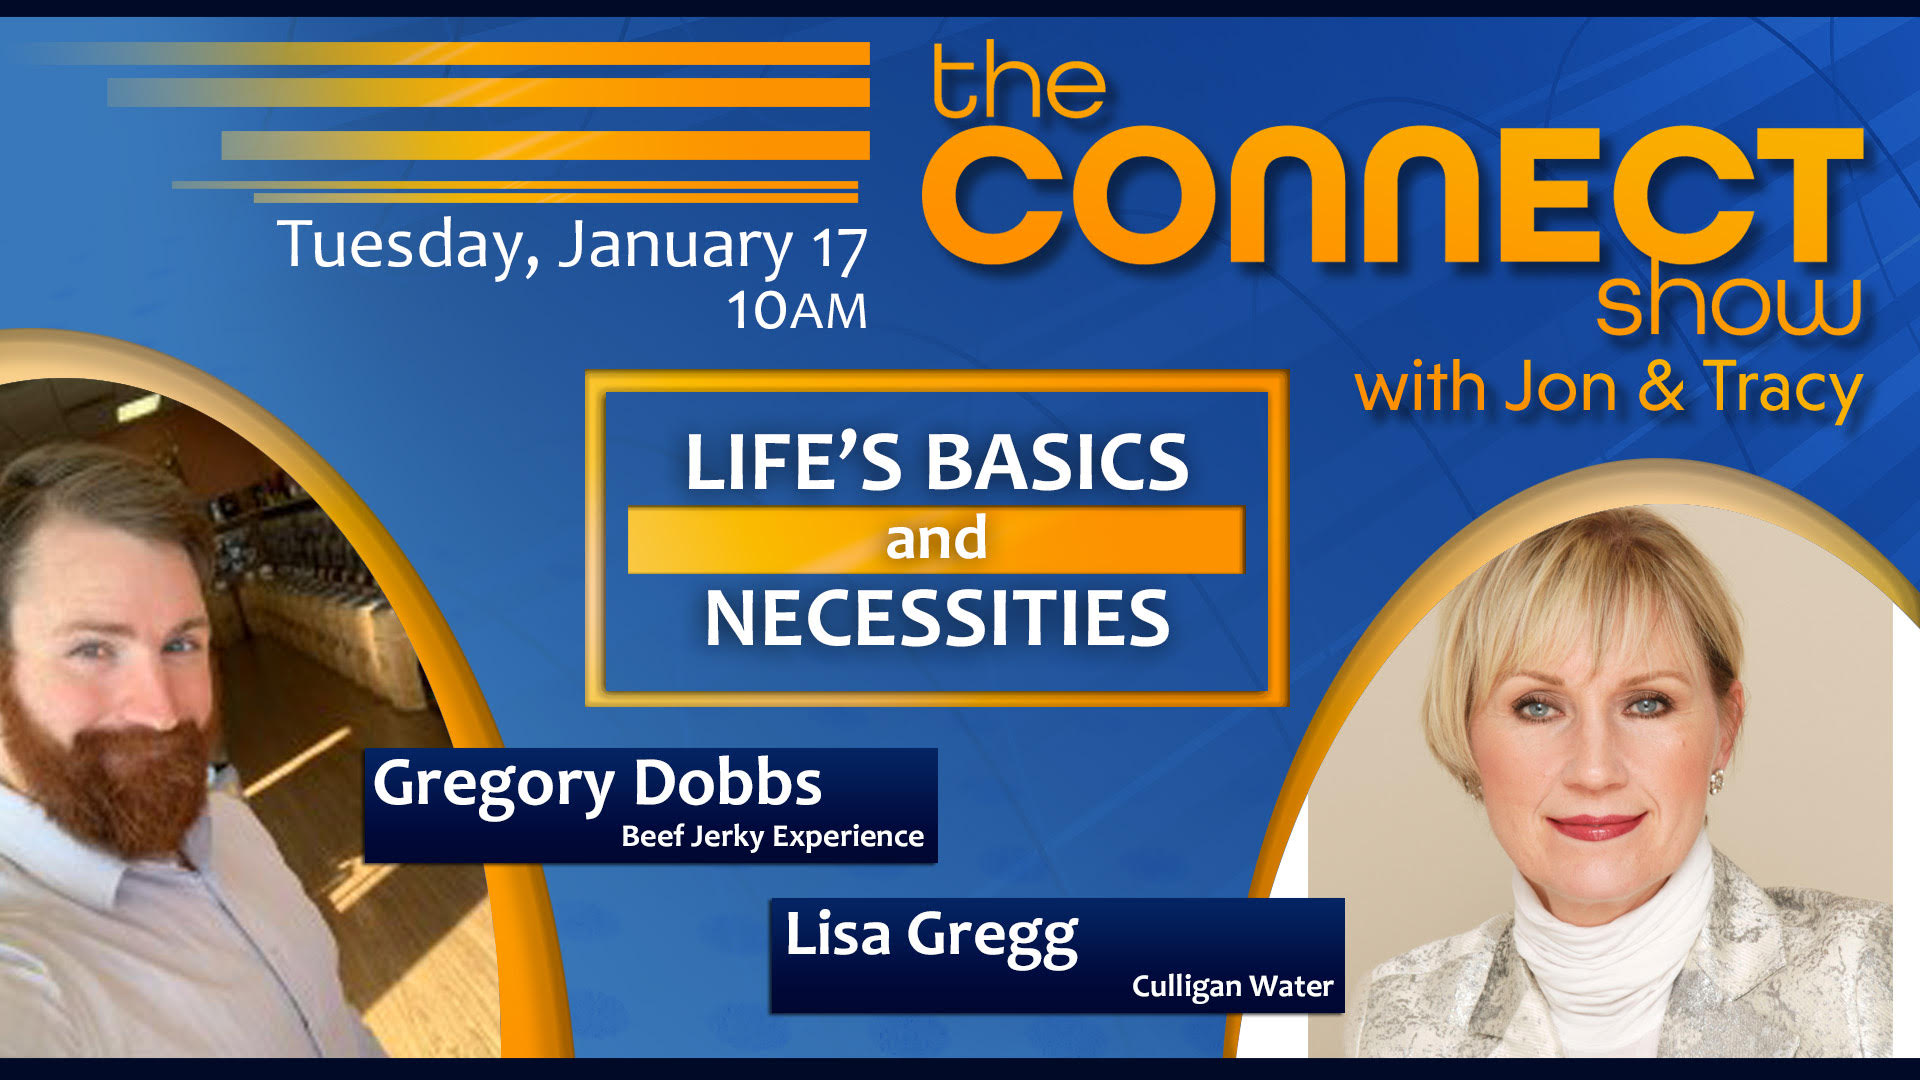 The connect show with John and Tracy Life’s Basics and Necessities Tuesday January 17 at 10am featuring Greggory Dobbs and Lisa Gregg.